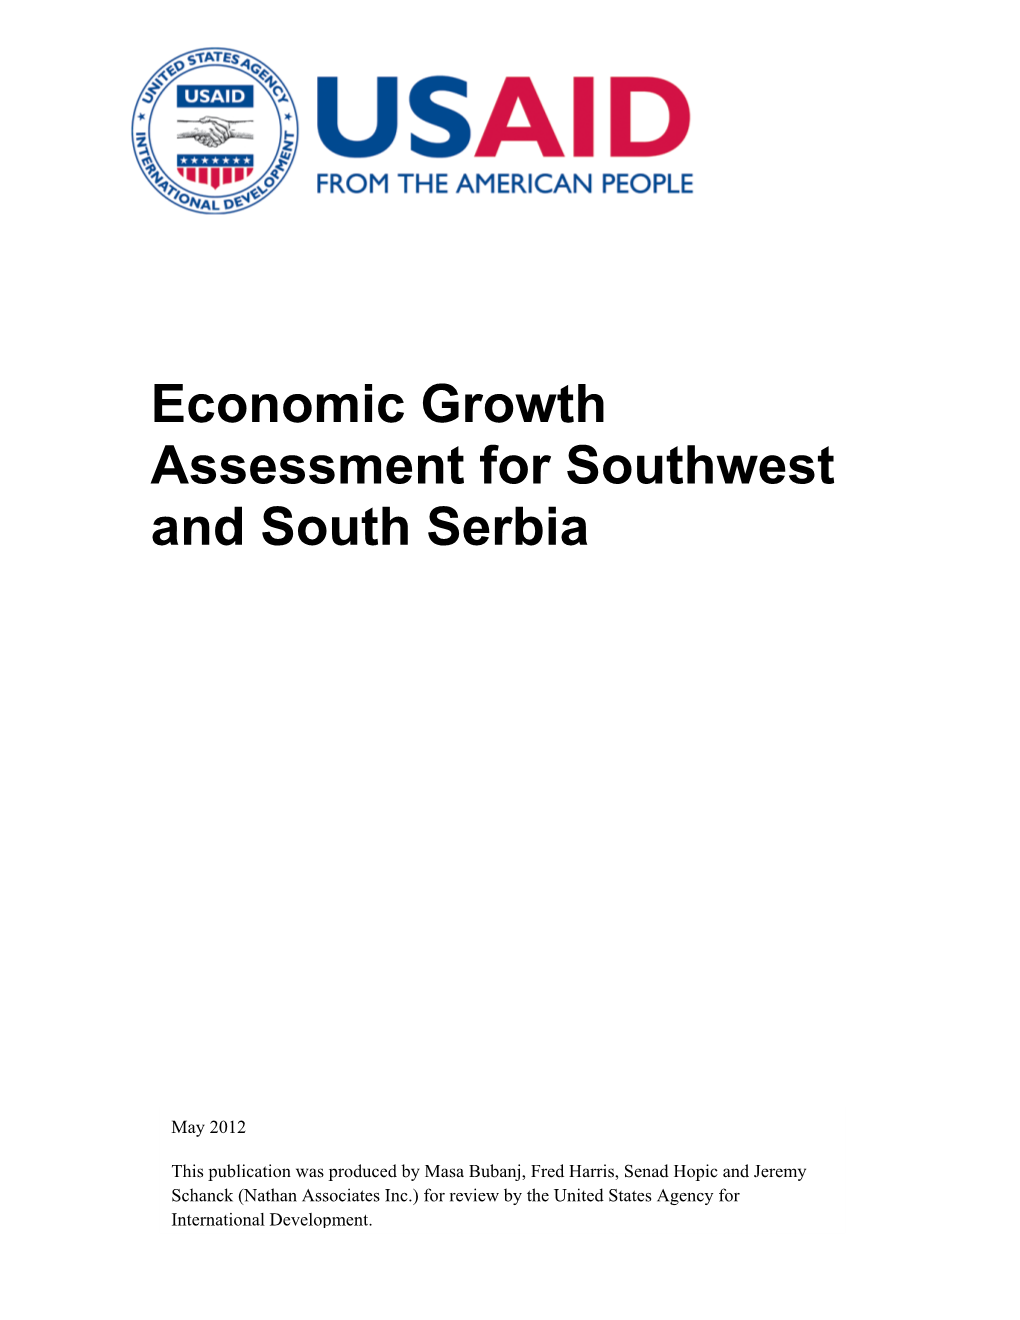 Economic Growth Assessment for Southwest and South Serbia